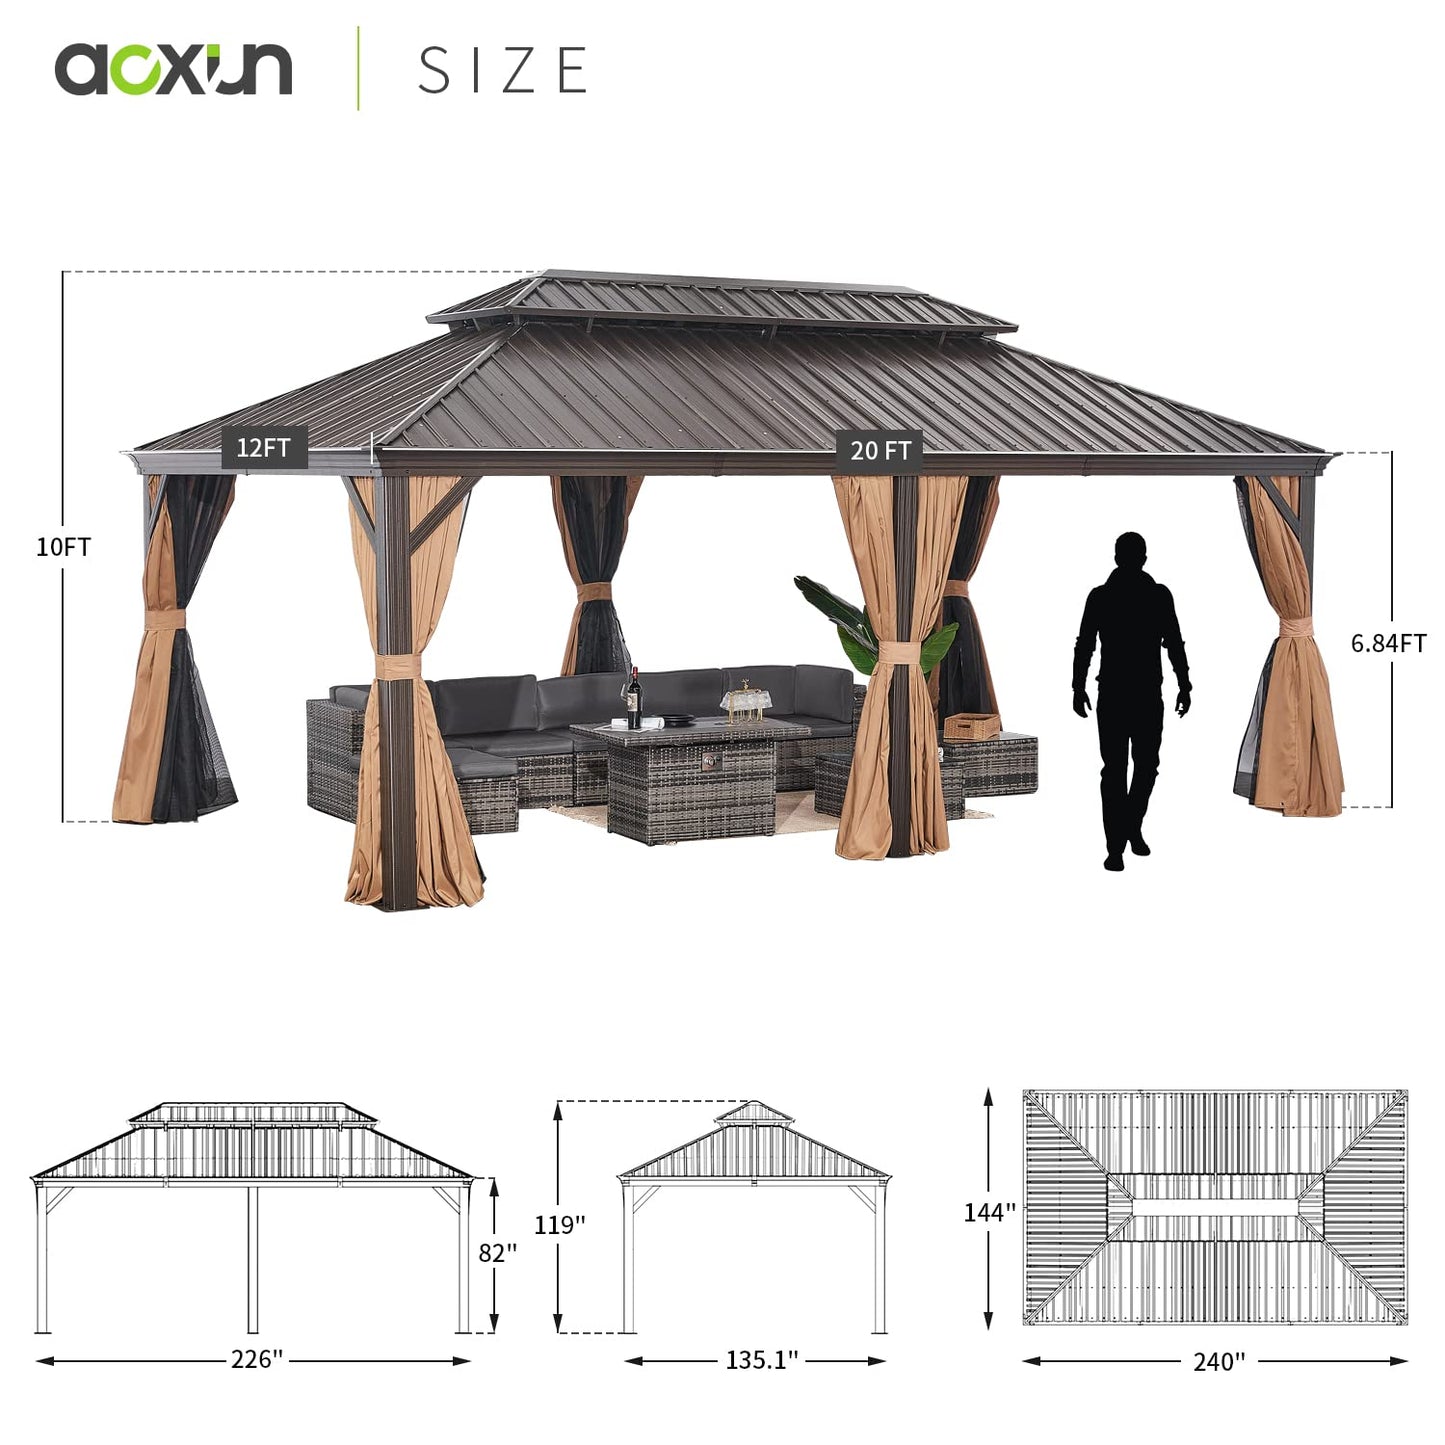 Aoxun 12' X 20' Permanent Hardtop Gazebo Aluminum Gazebo with Galvanized Steel Double Roof for Patio Lawn and Garden, Curtains and Netting Included,